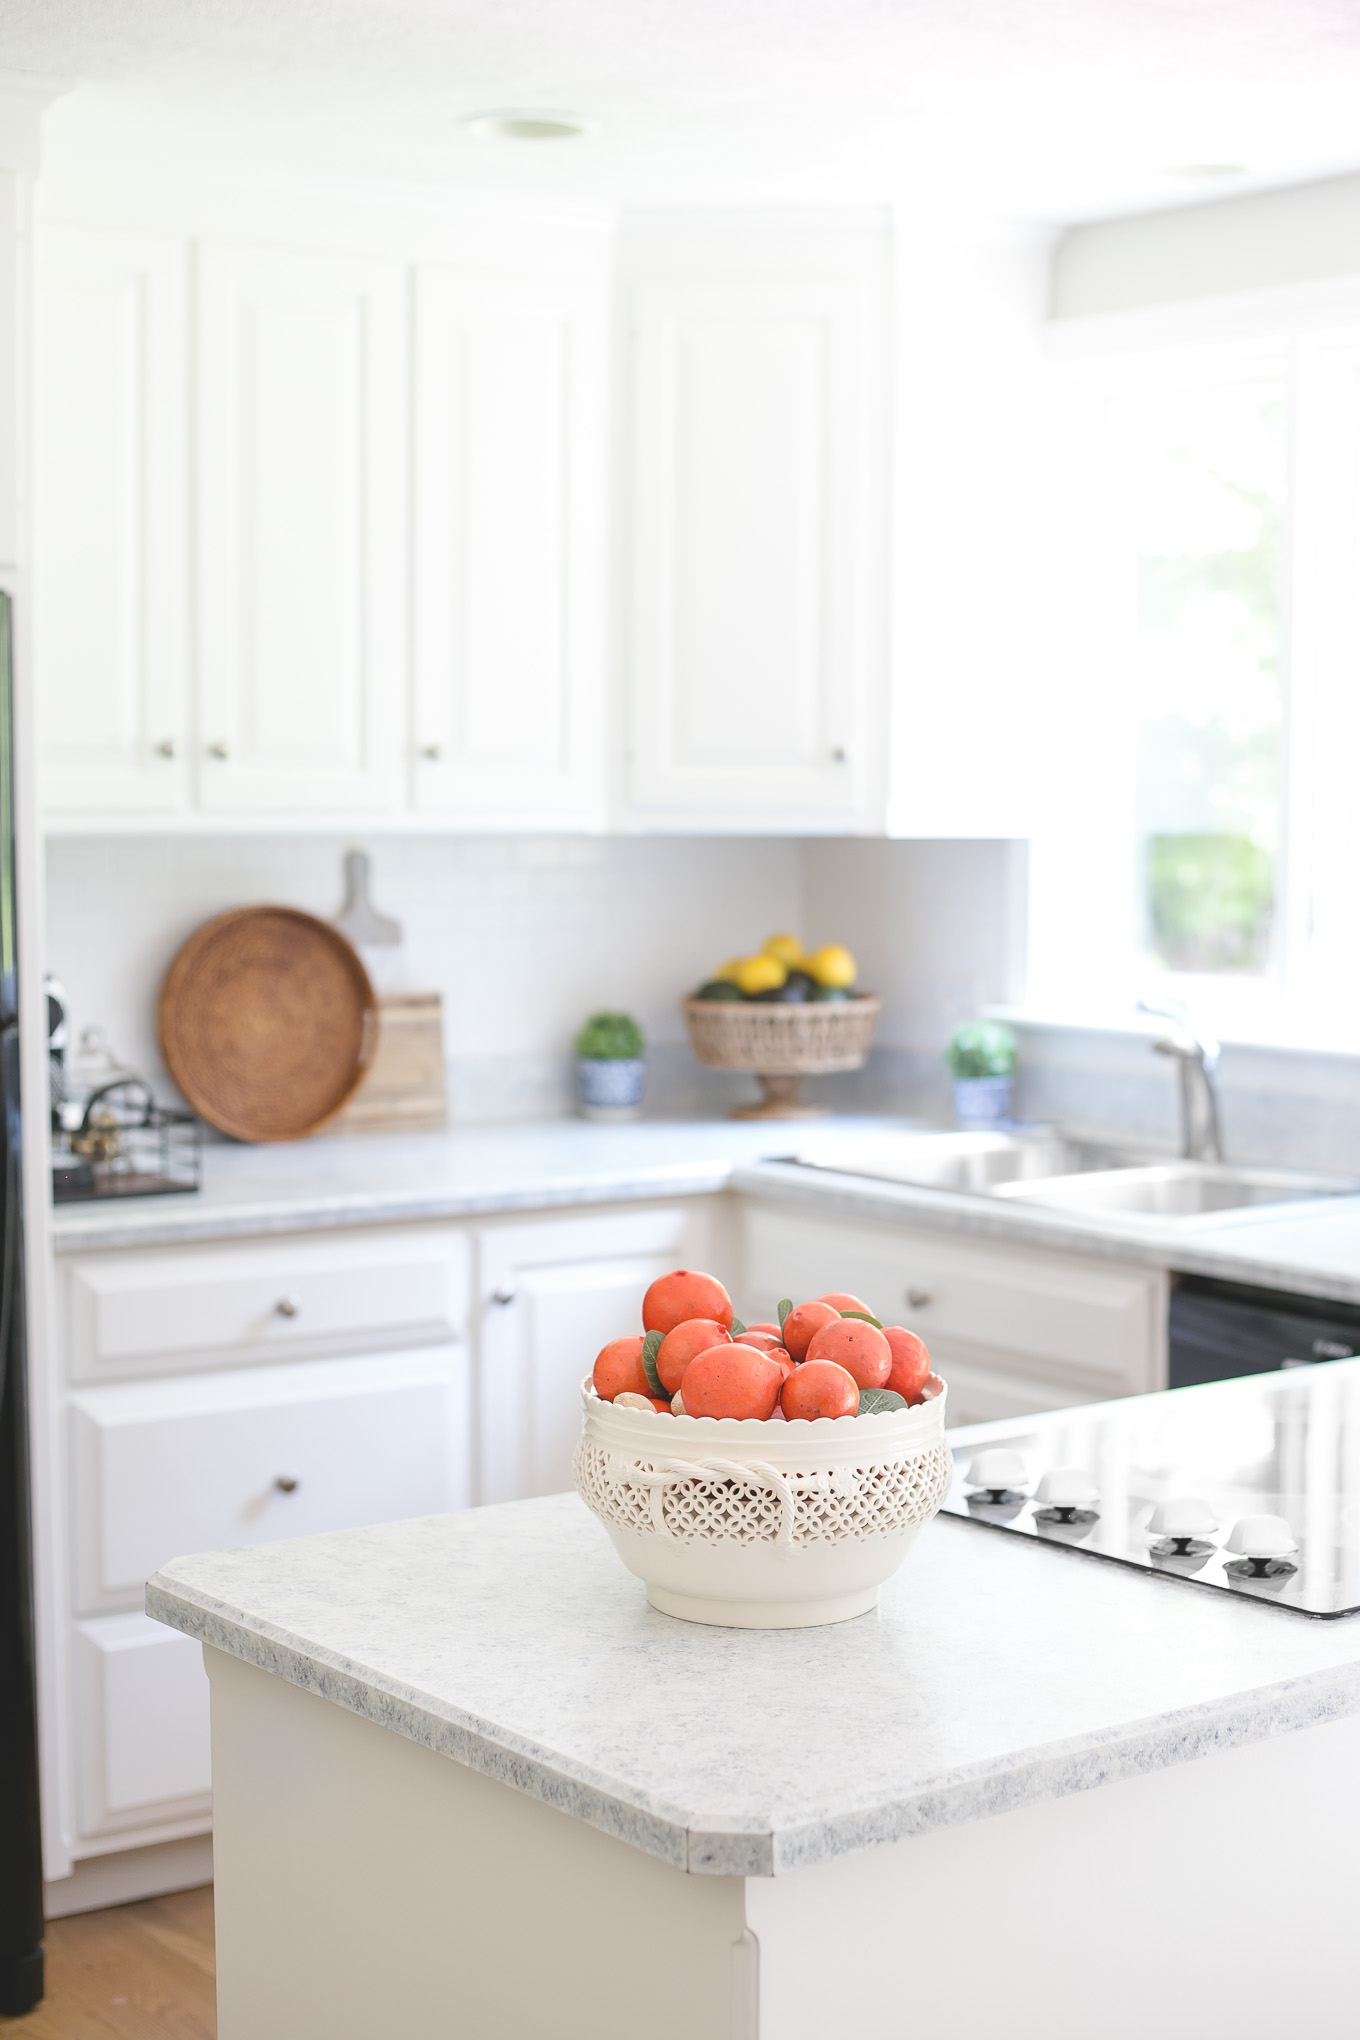 How I Painted My Kitchen Countertops, Can You Paint Laminate Countertops To Look Like Granite